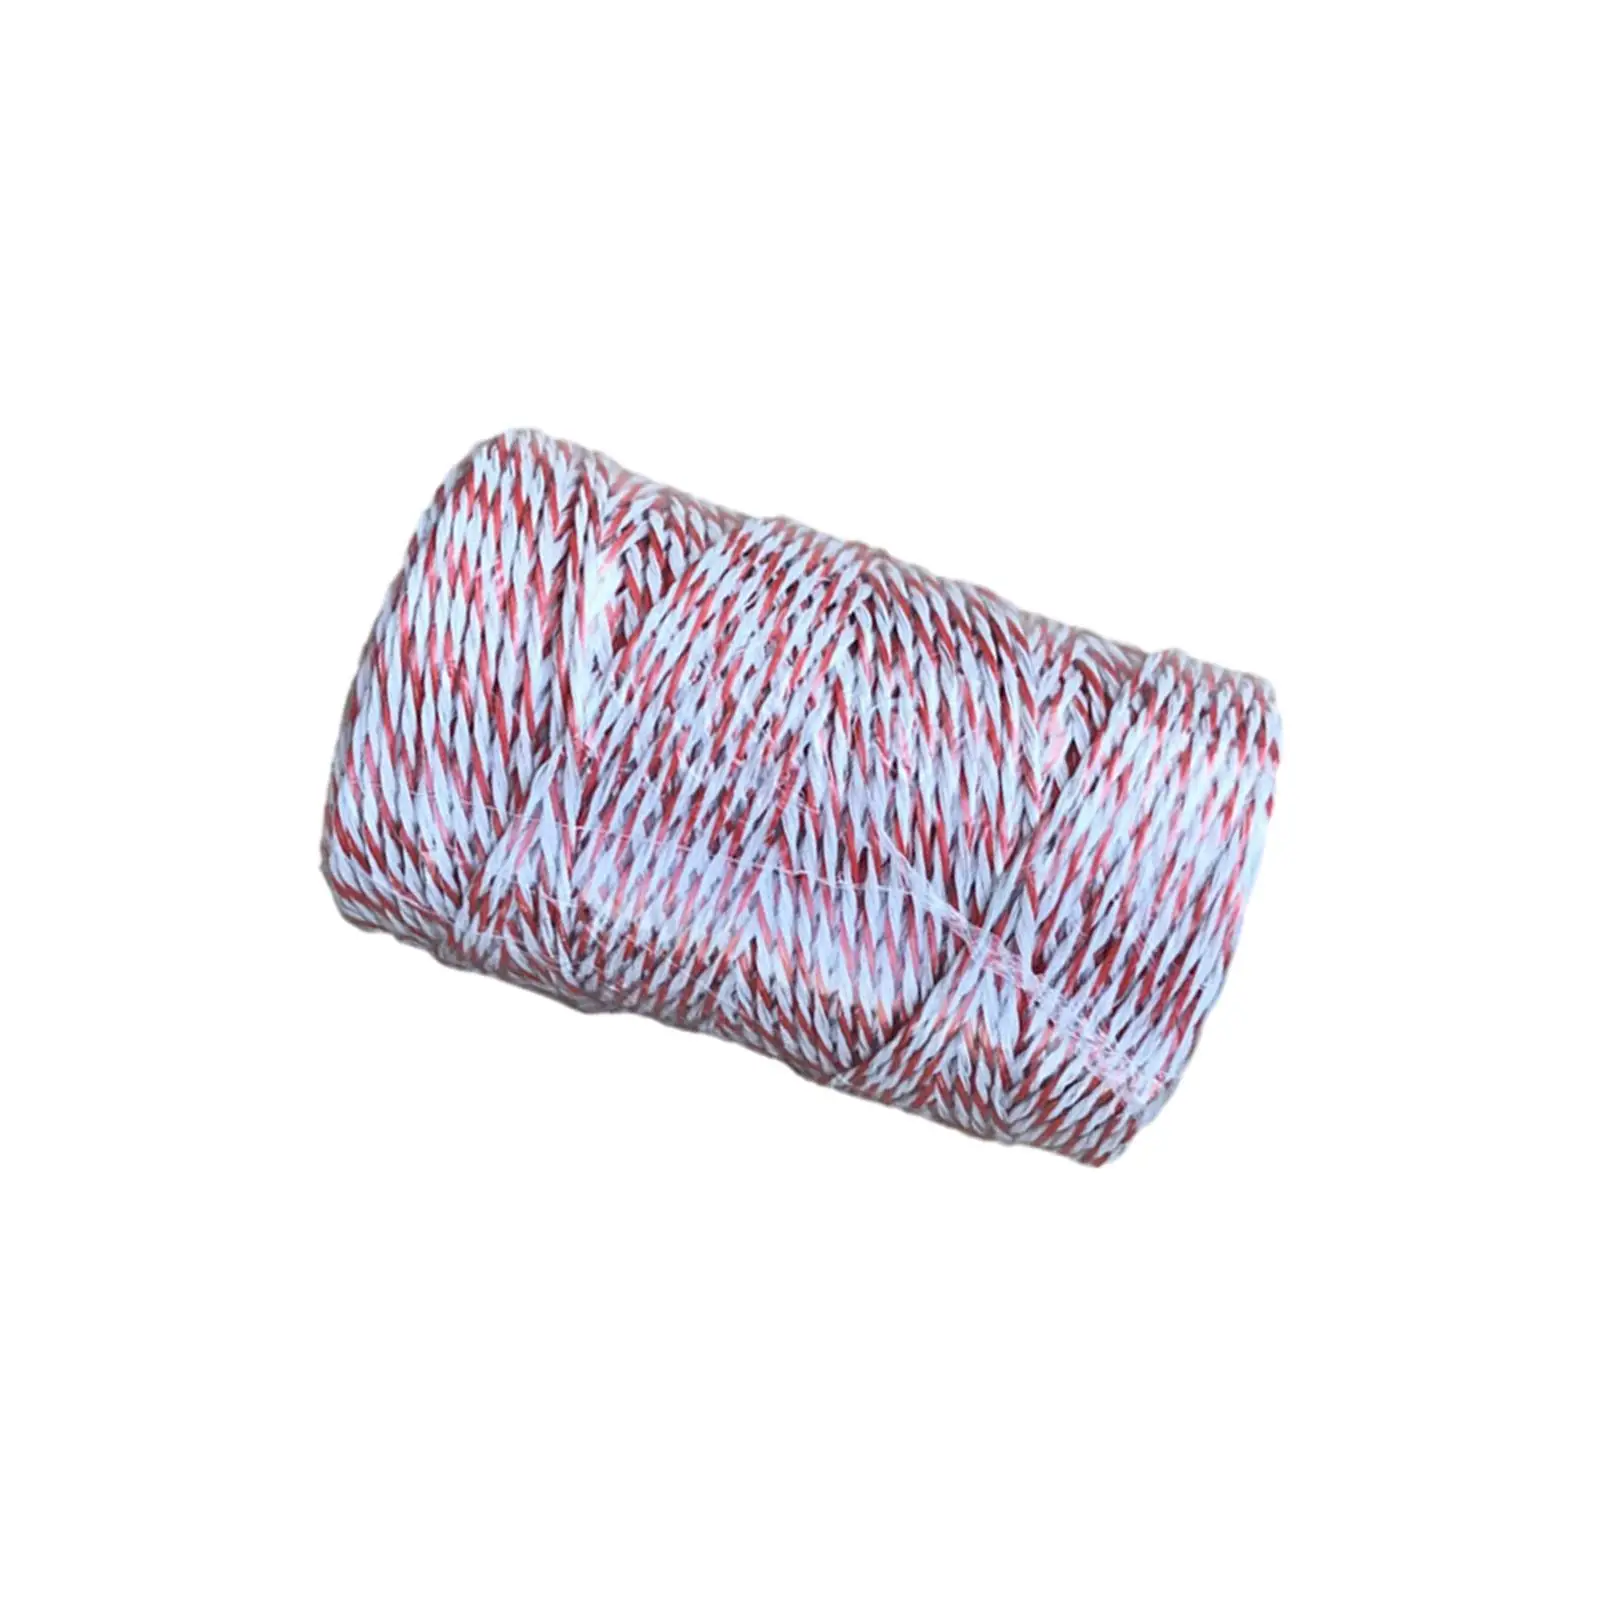 Electric Fence Rope Conductive Strong Conductivity Portable 200M Power Wire Poly Rope for Horse Sheep Husbandry Livestock Cattle